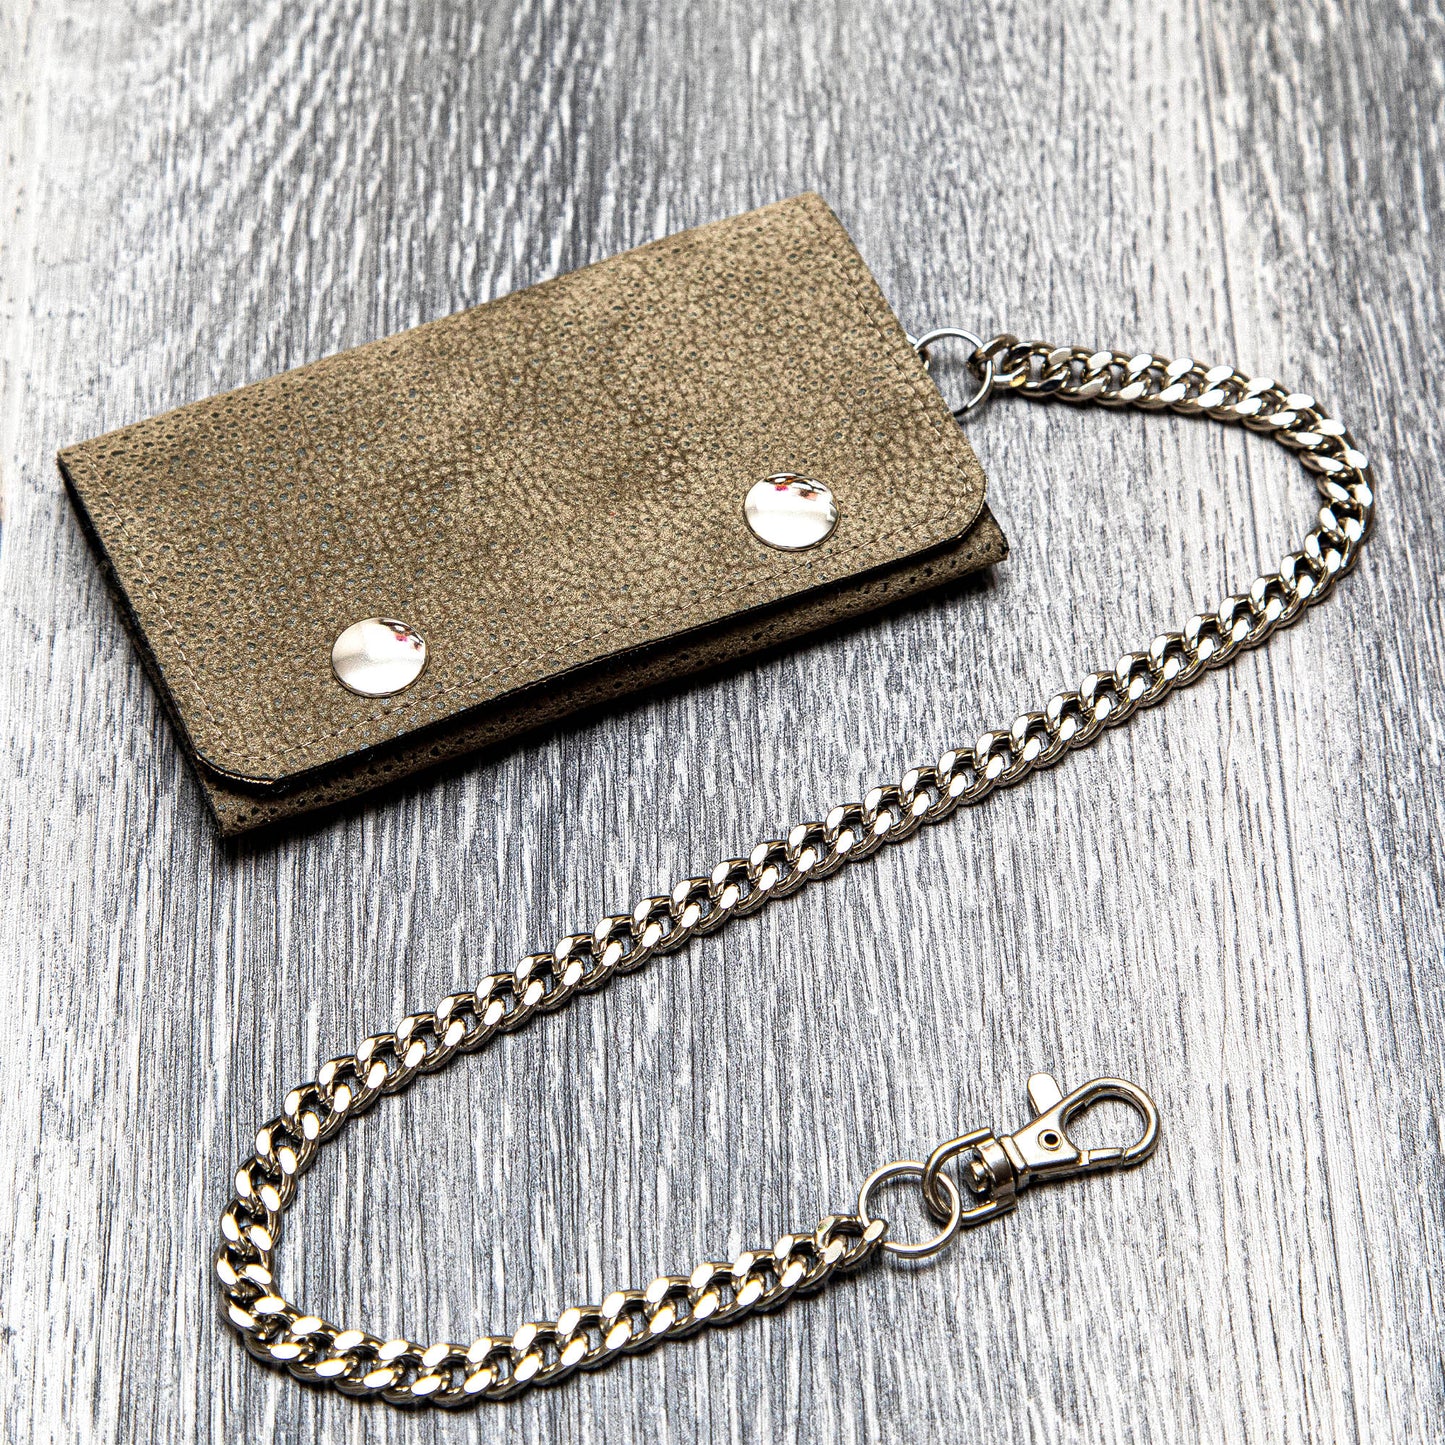 Handcrafted Biker Wallet with Detachable Chain - Cruelty-Free and Fashionably Functional - Brown Faux Leather